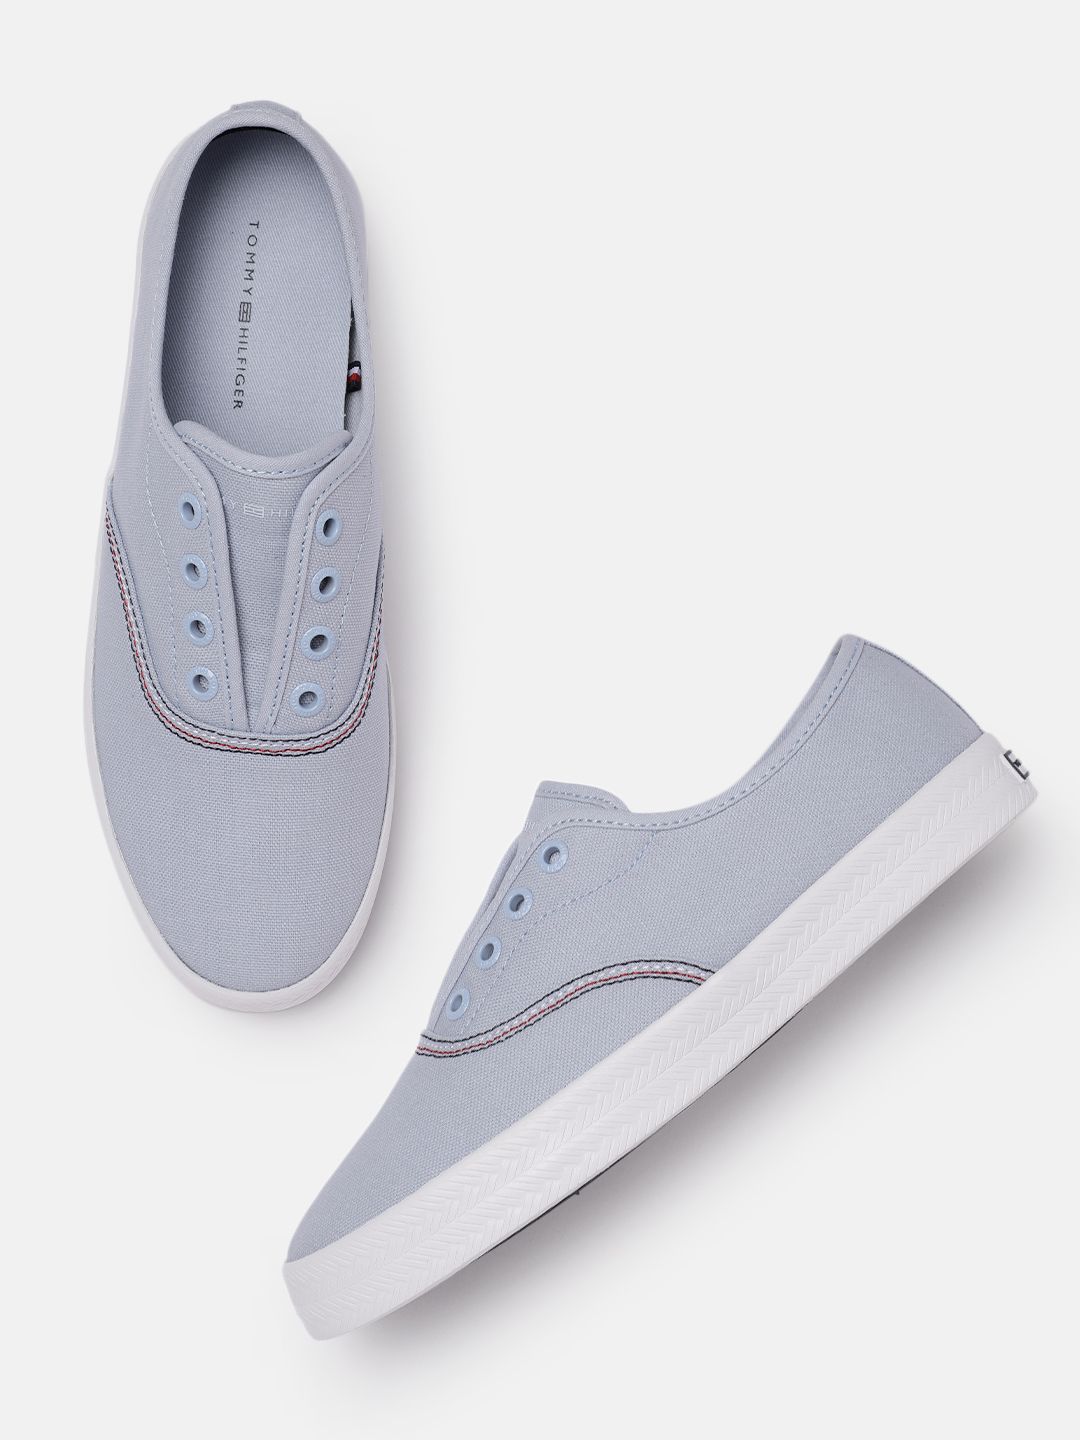 Tommy Hilfiger Women Blue Slip-On Sneakers Price in India